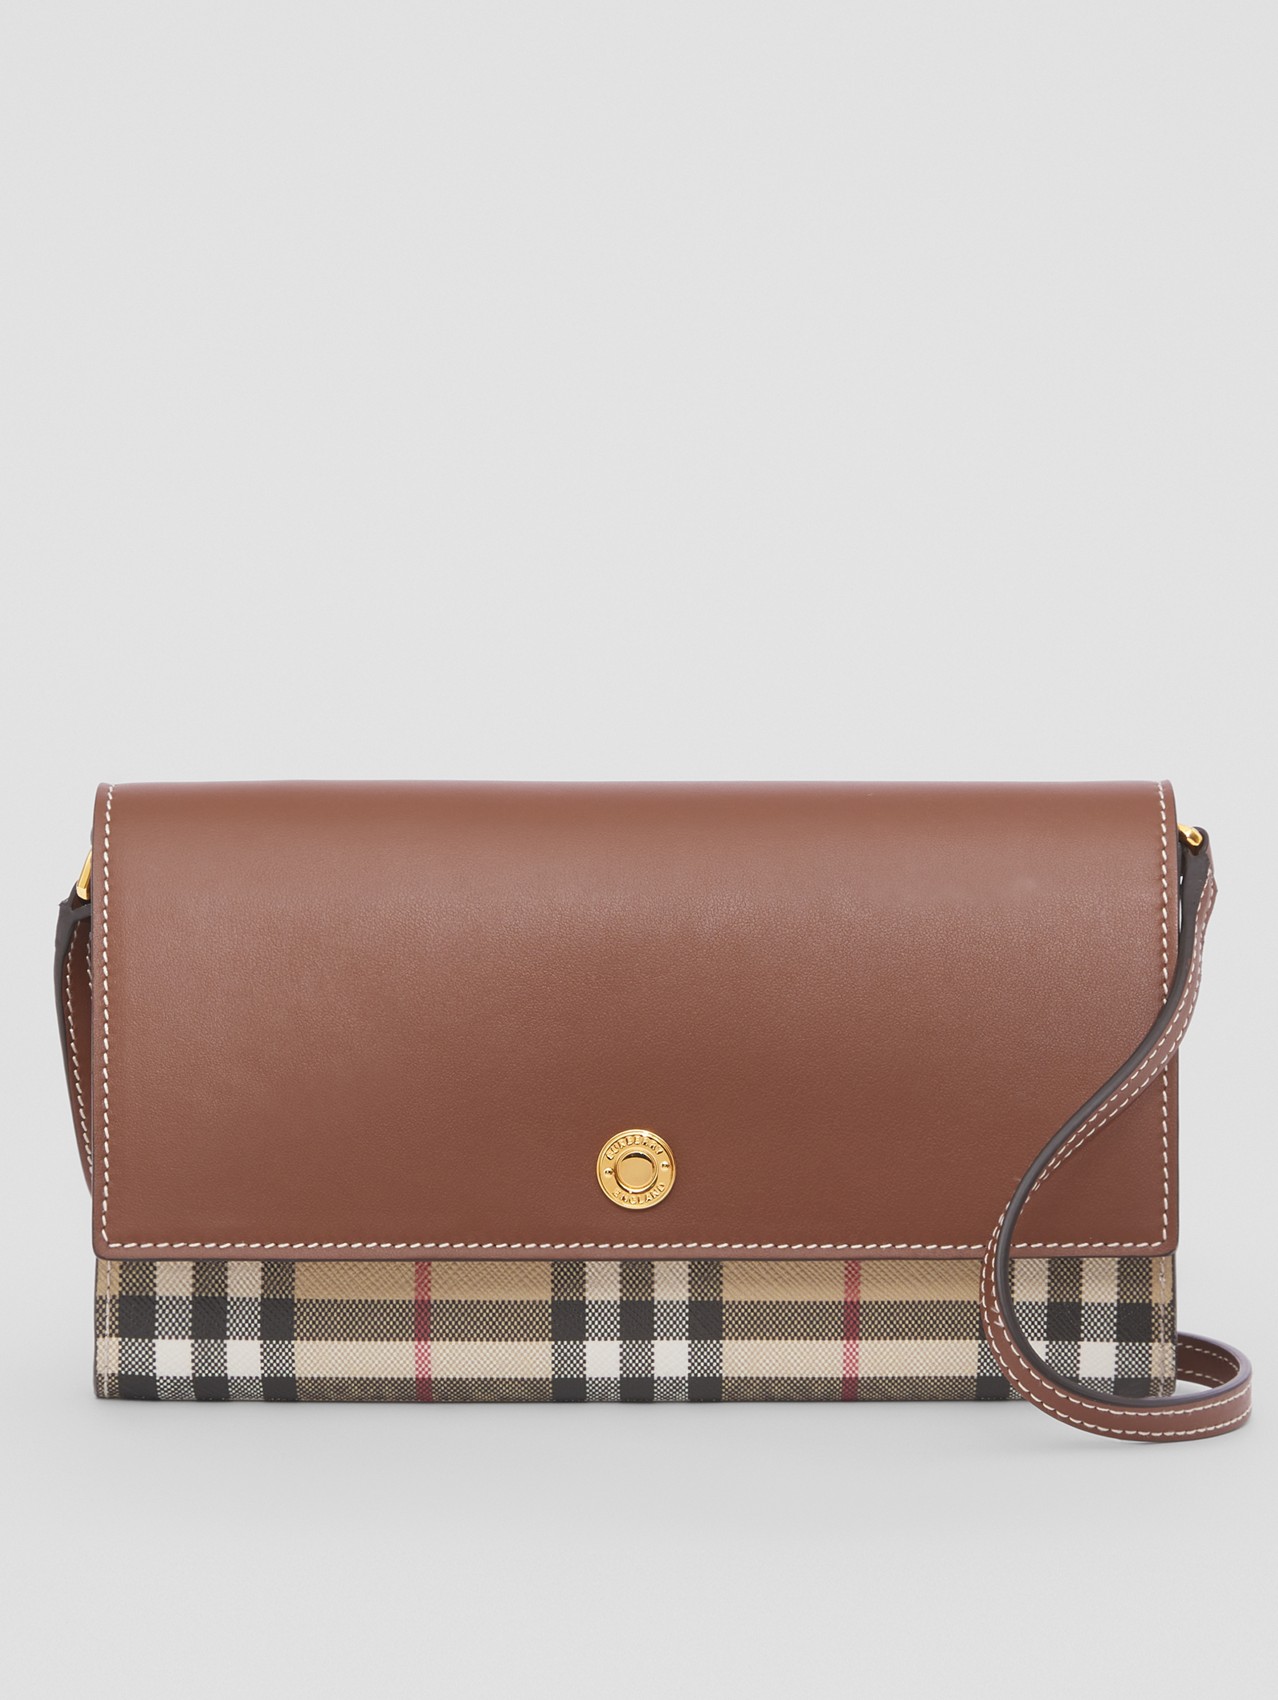 Check and Leather Wallet with Detachable Strap in Archive Beige/tan